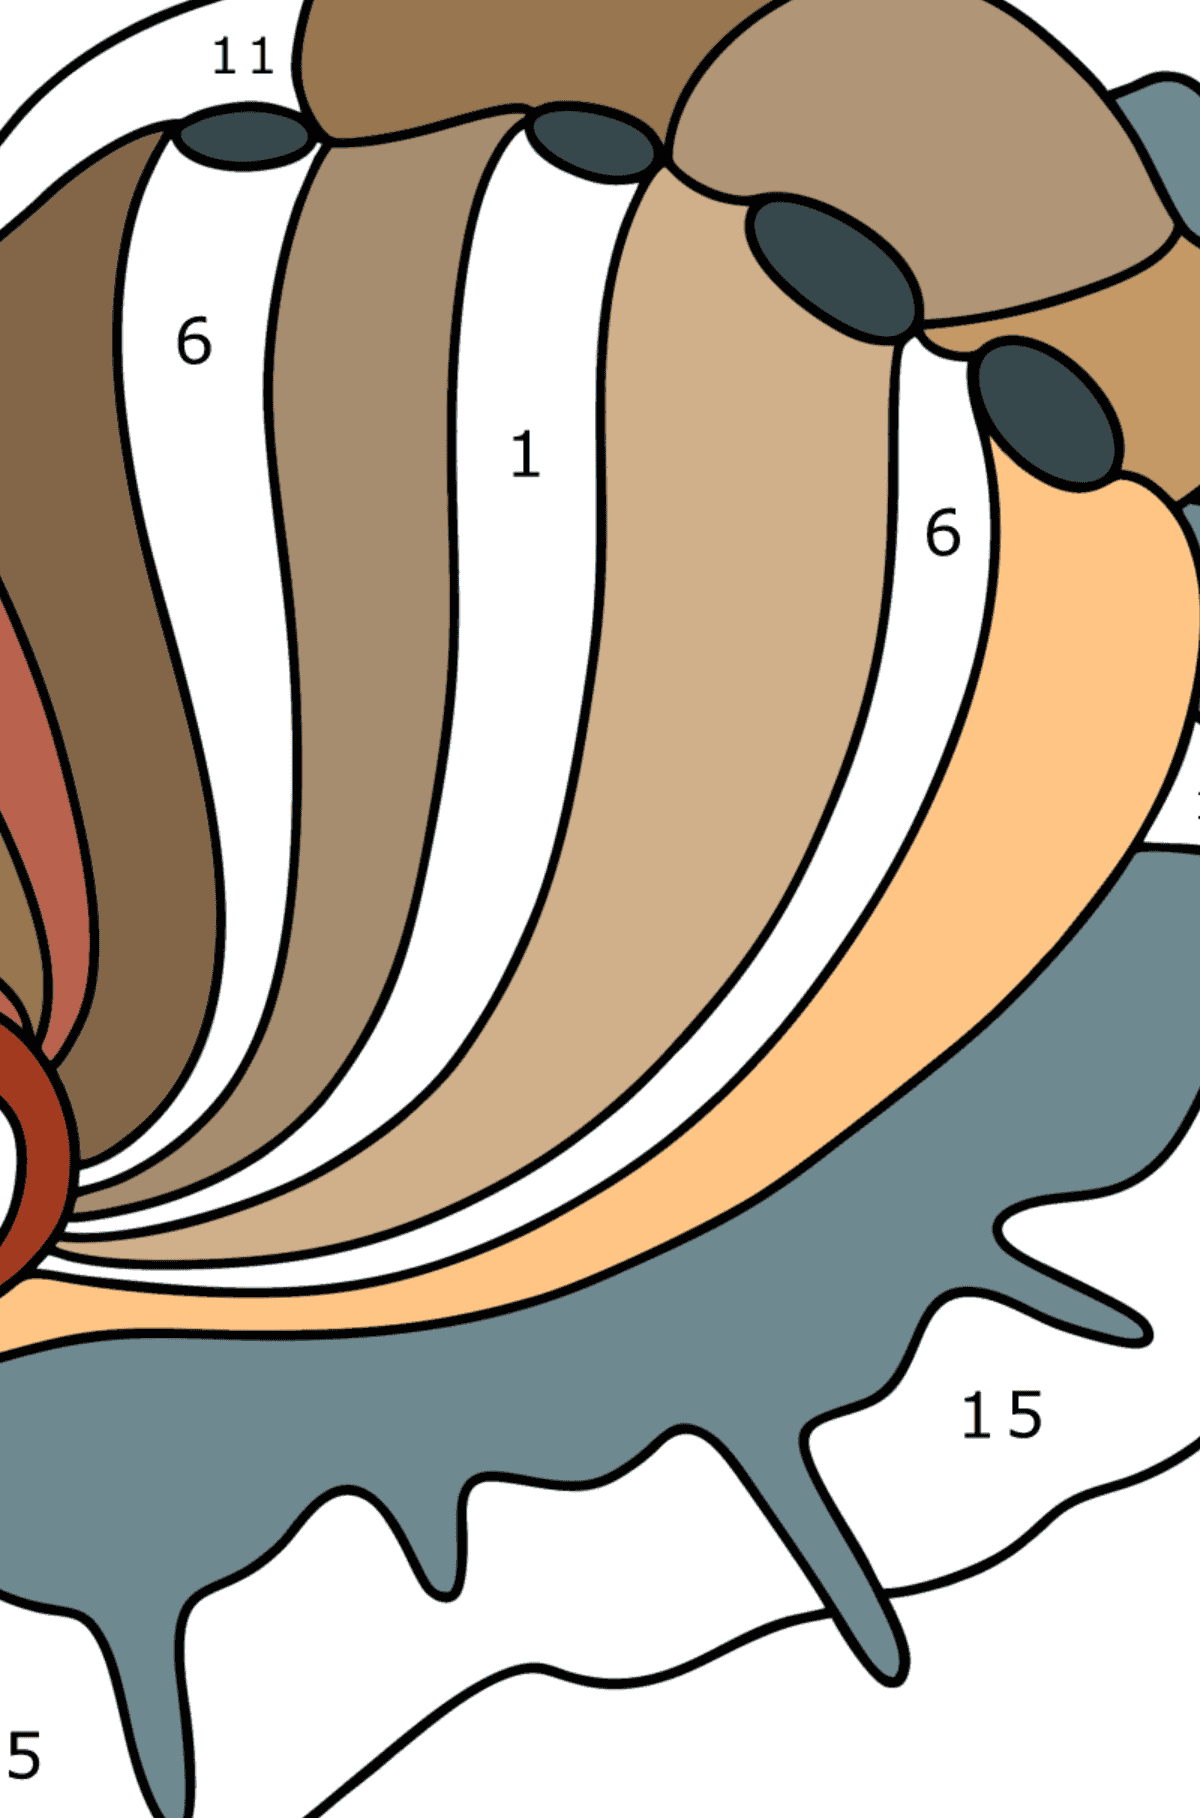 Mollusk abalone coloring page - Coloring by Numbers for Kids